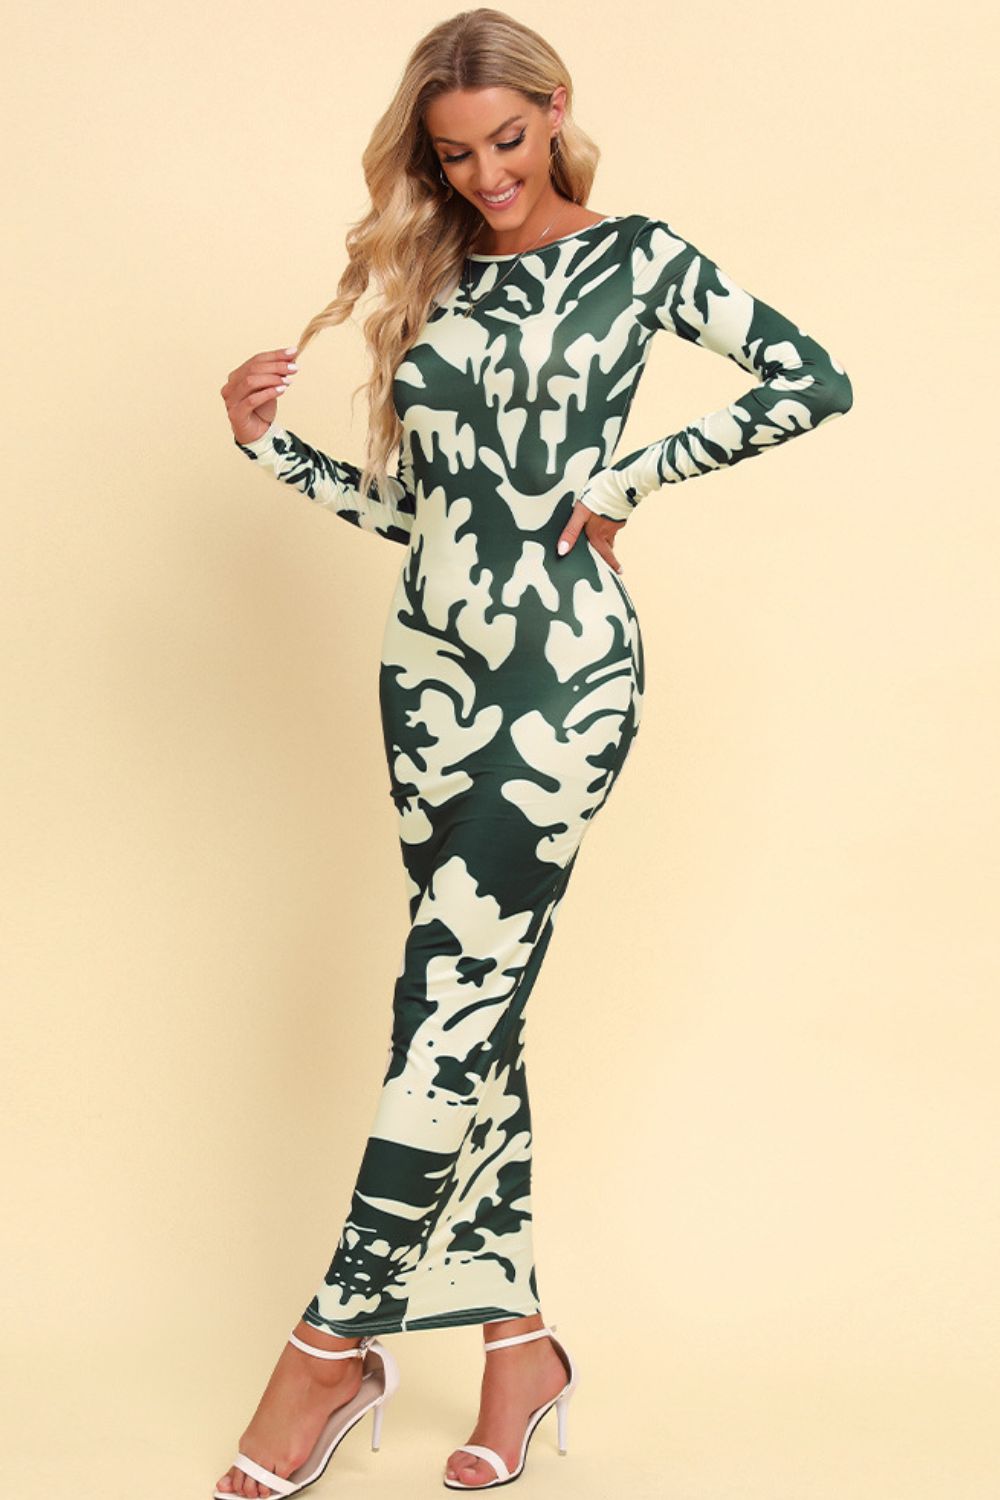 Printed Backless Long Sleeve Maxi Dress - Casual & Maxi Dresses - FITGGINS